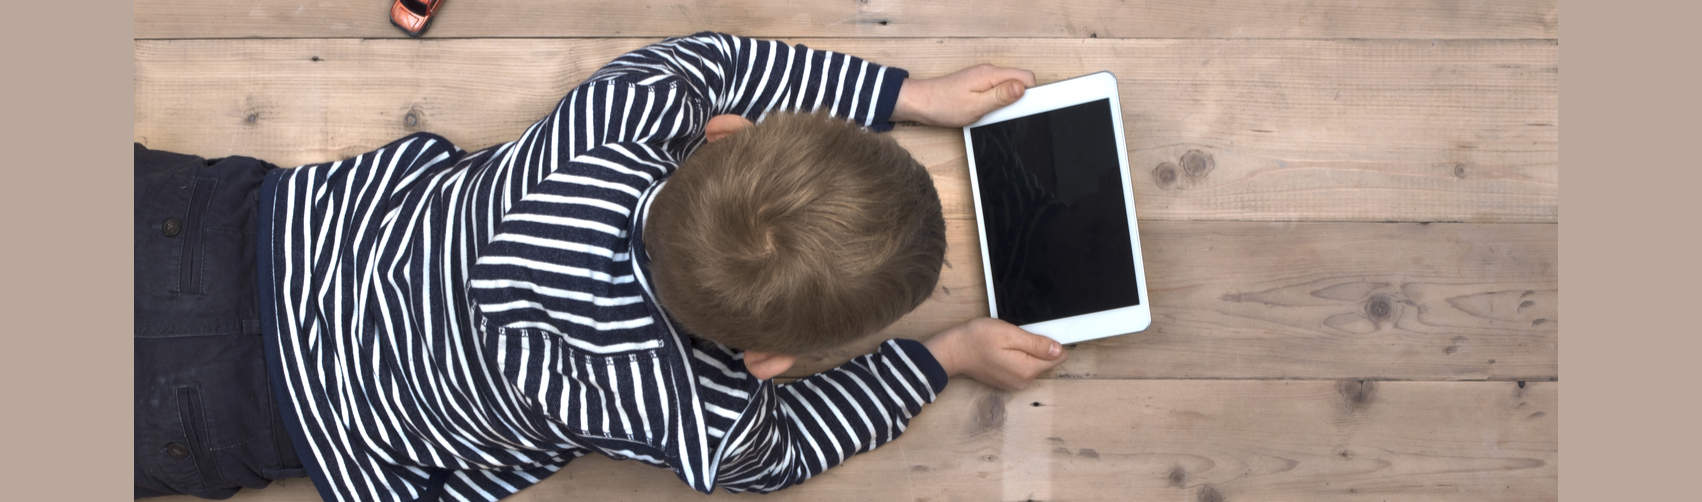 Parents told to worry less about children’s screen use…